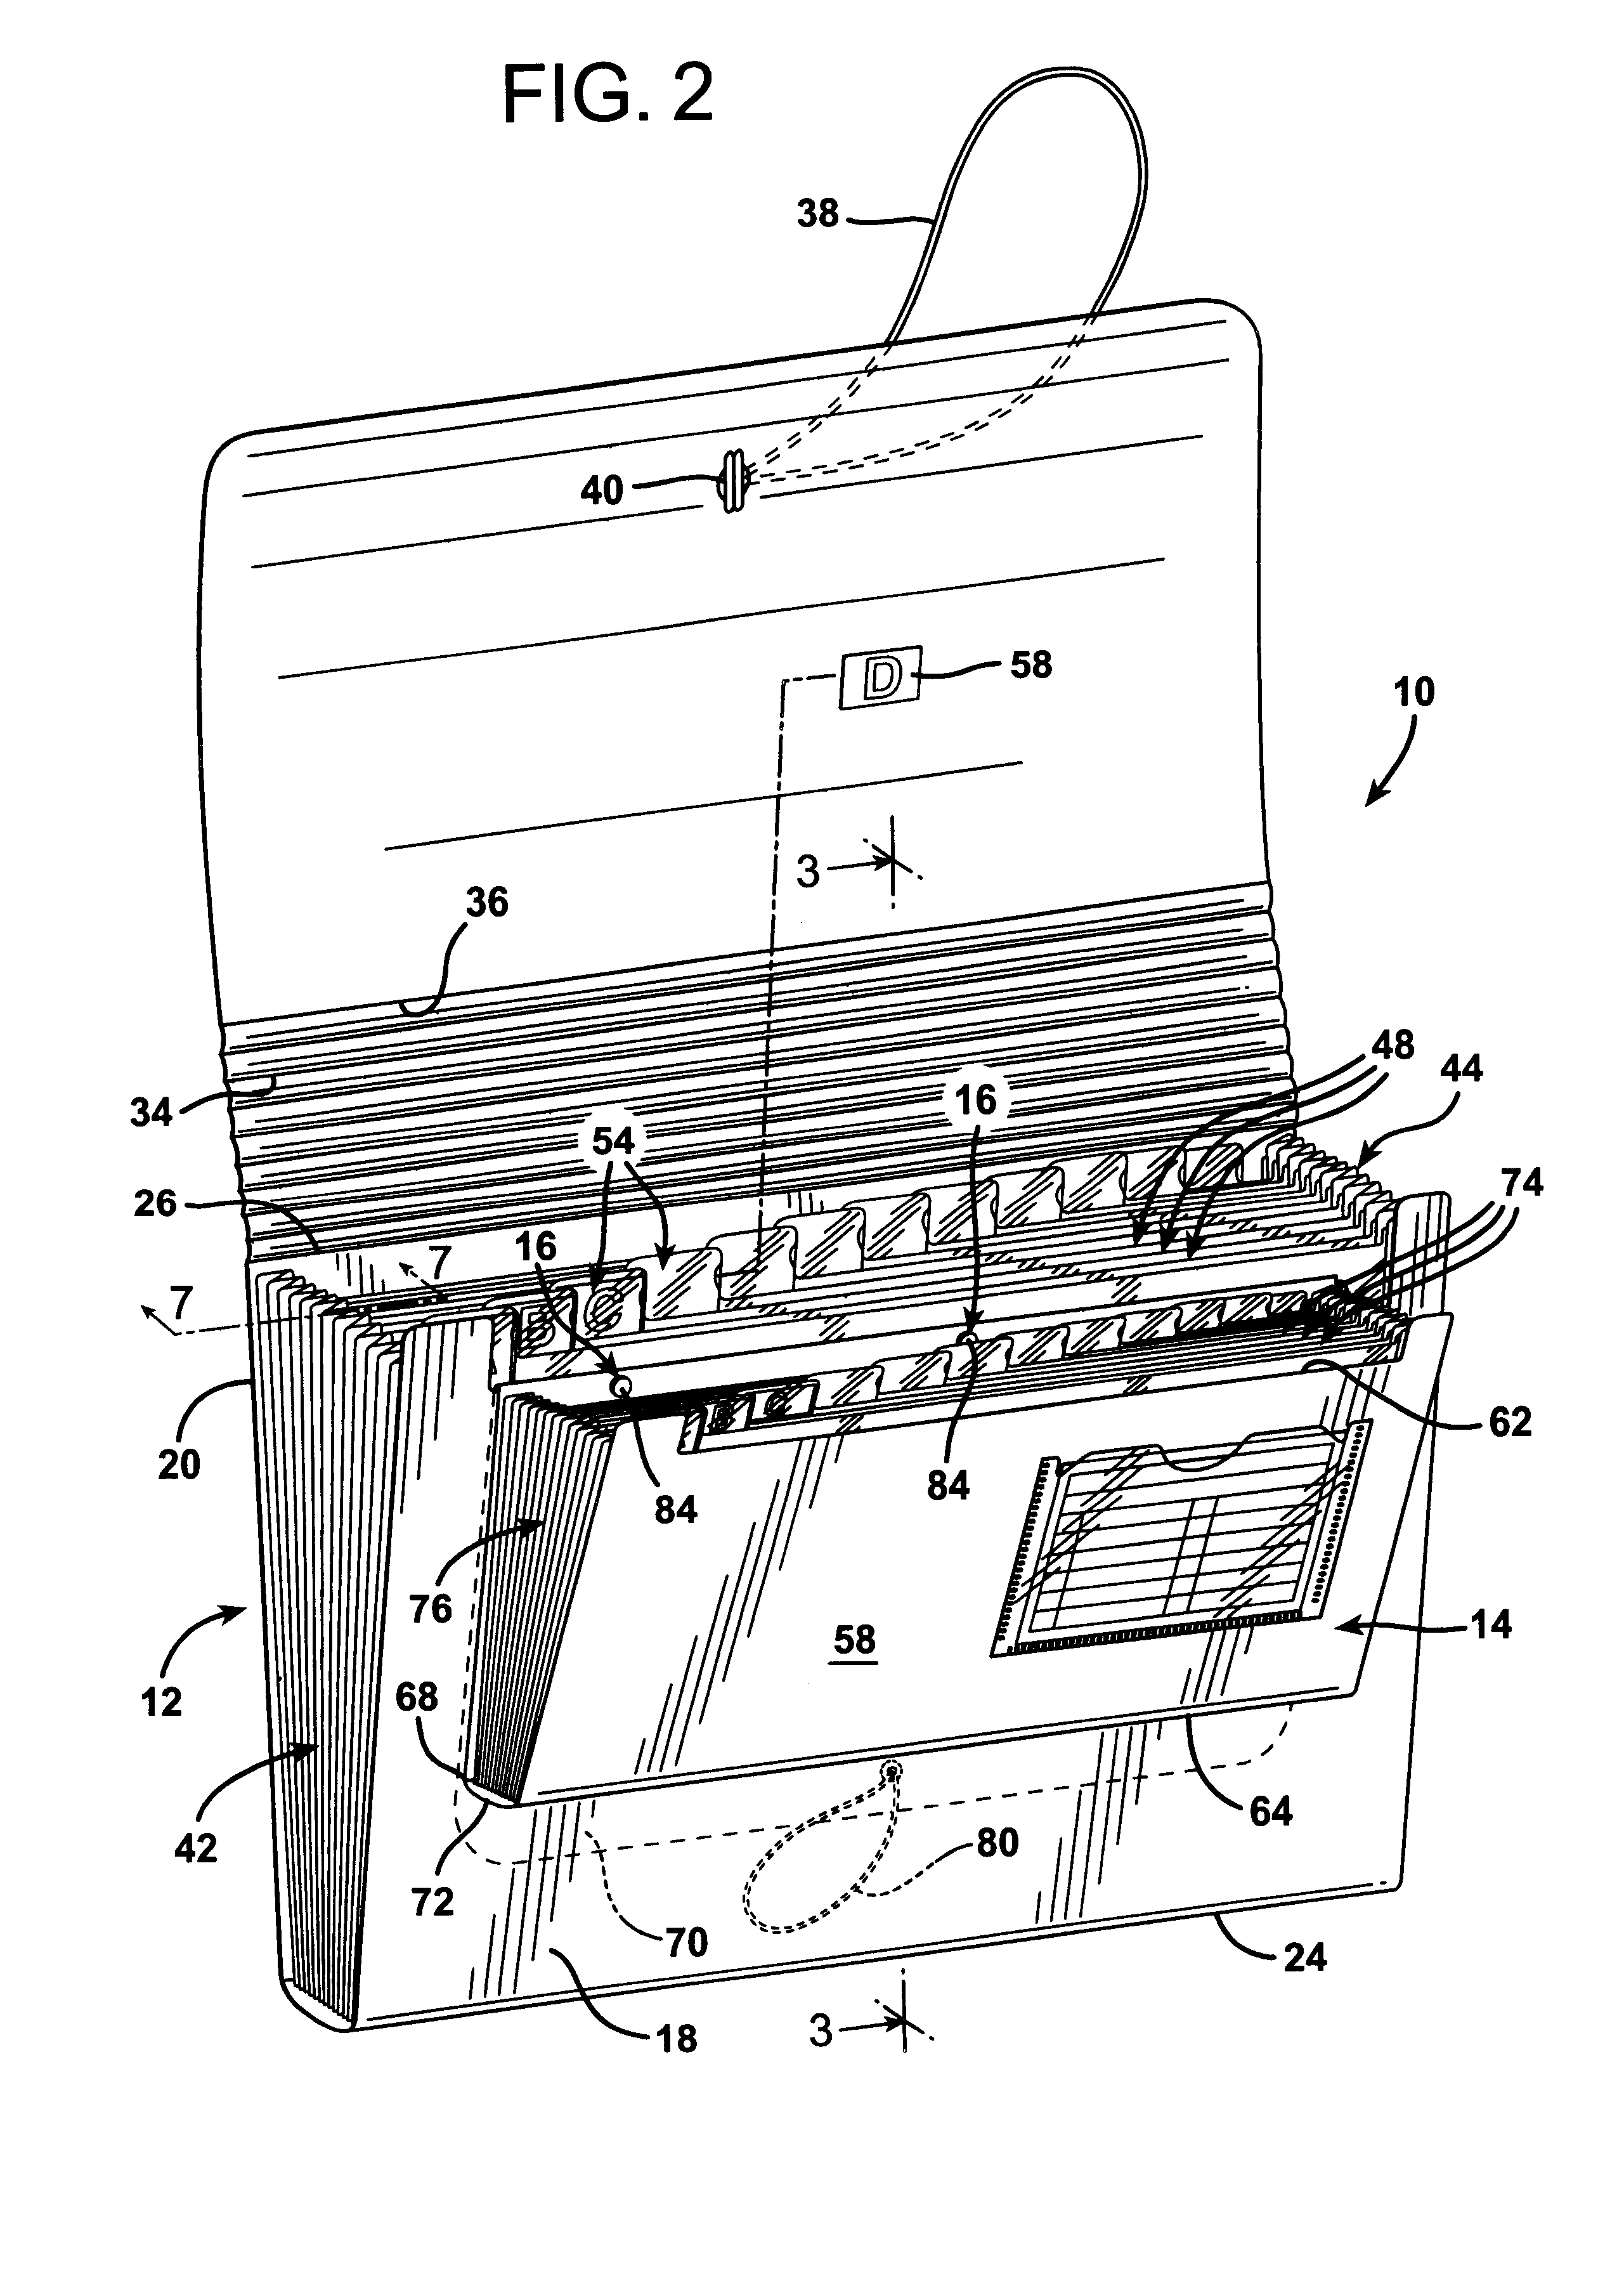 Combined detachable filing wallet devices